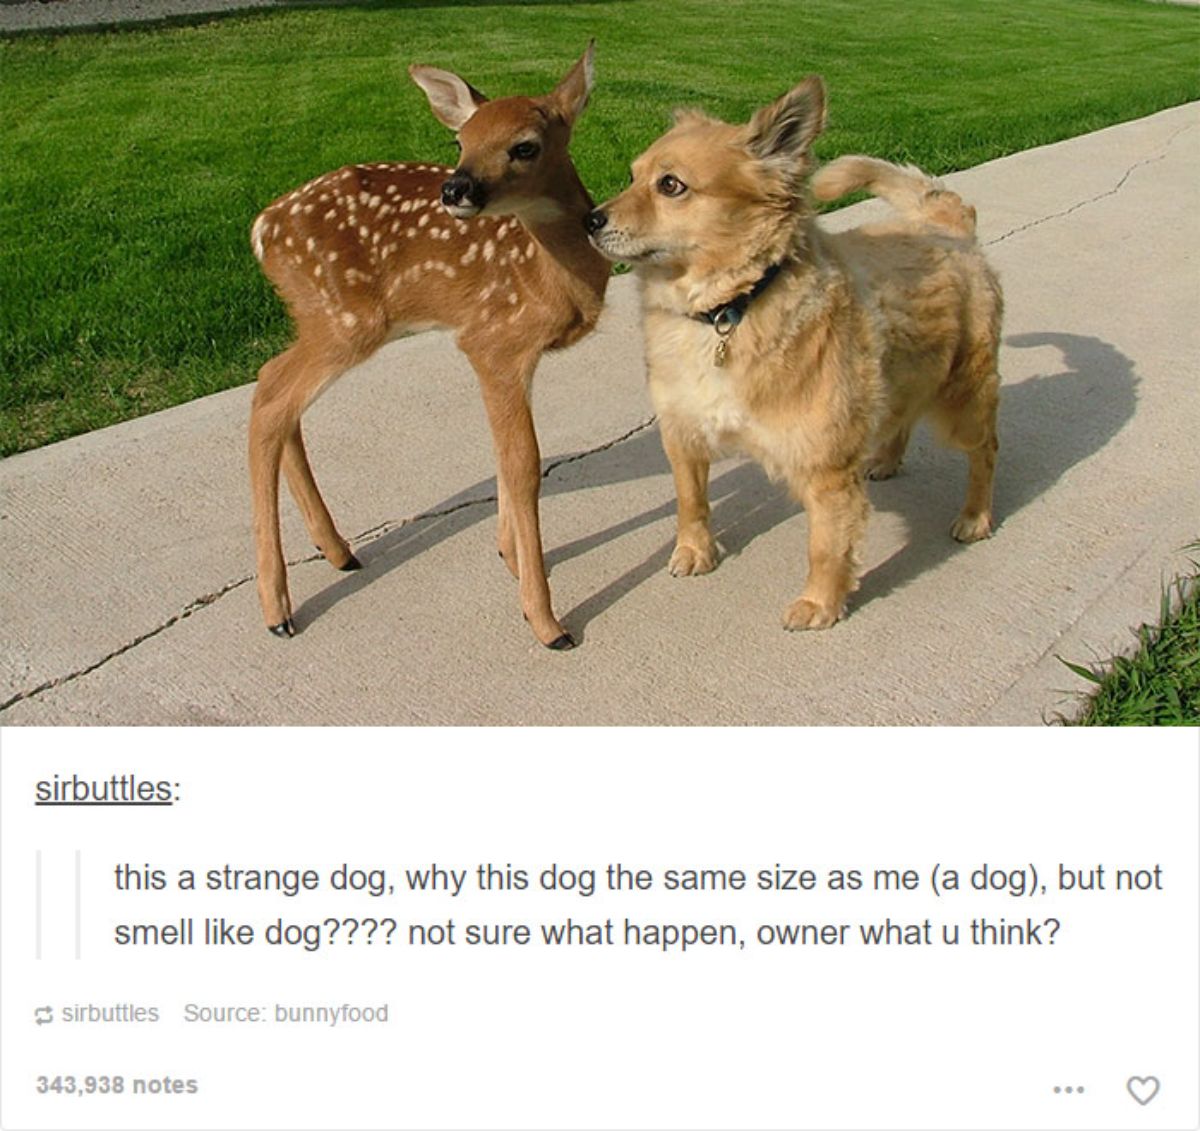 fluffy brown dog standing next to a brown baby deer